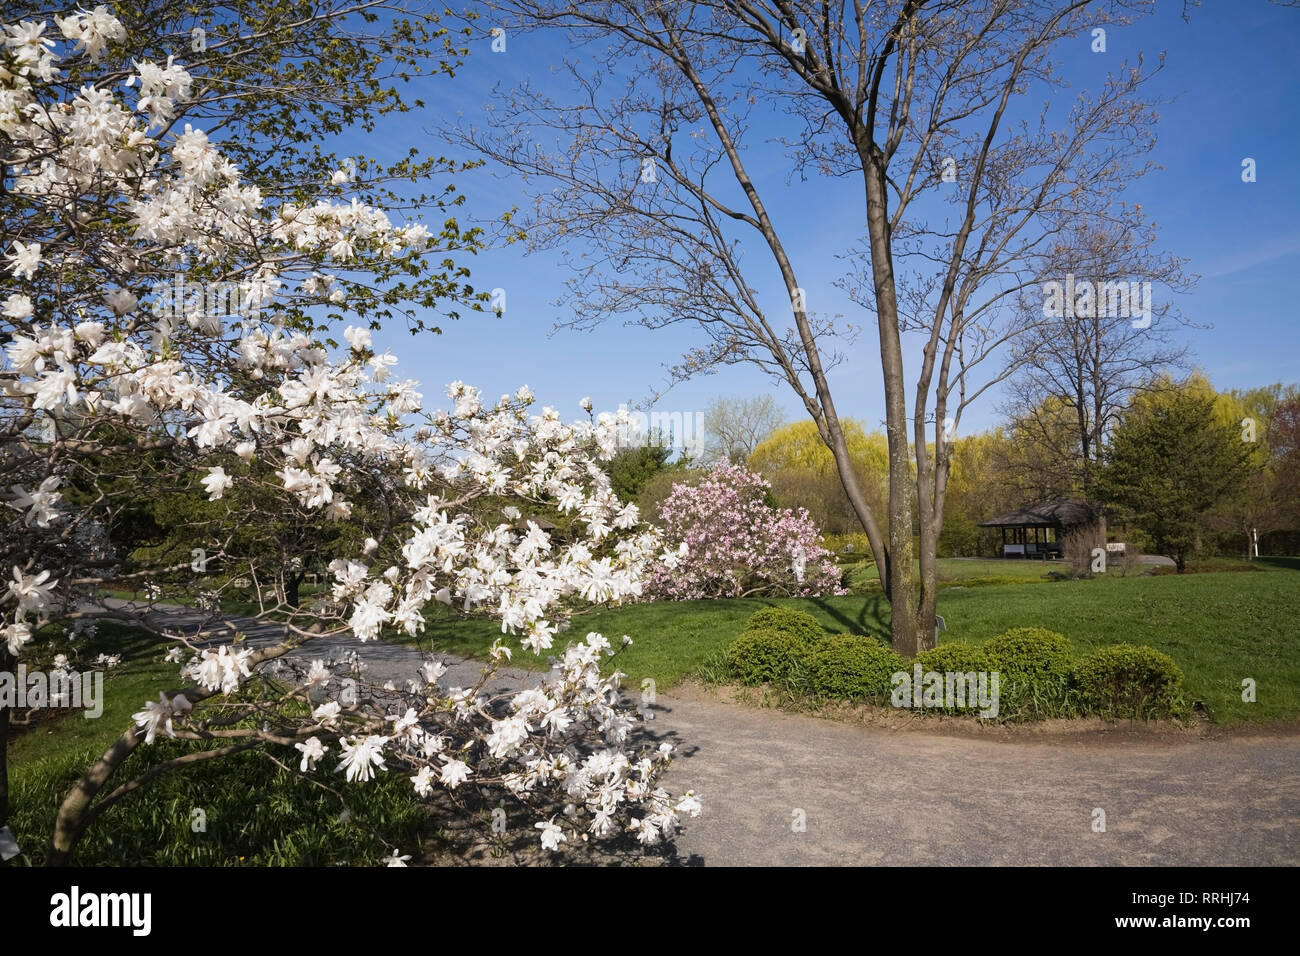 White and pink flowering Magnolia trees and footpath in Japanese Garden with the Lookout pavilion in spring, Montreal Botanical Garden, Quebec, Canada Stock Photo